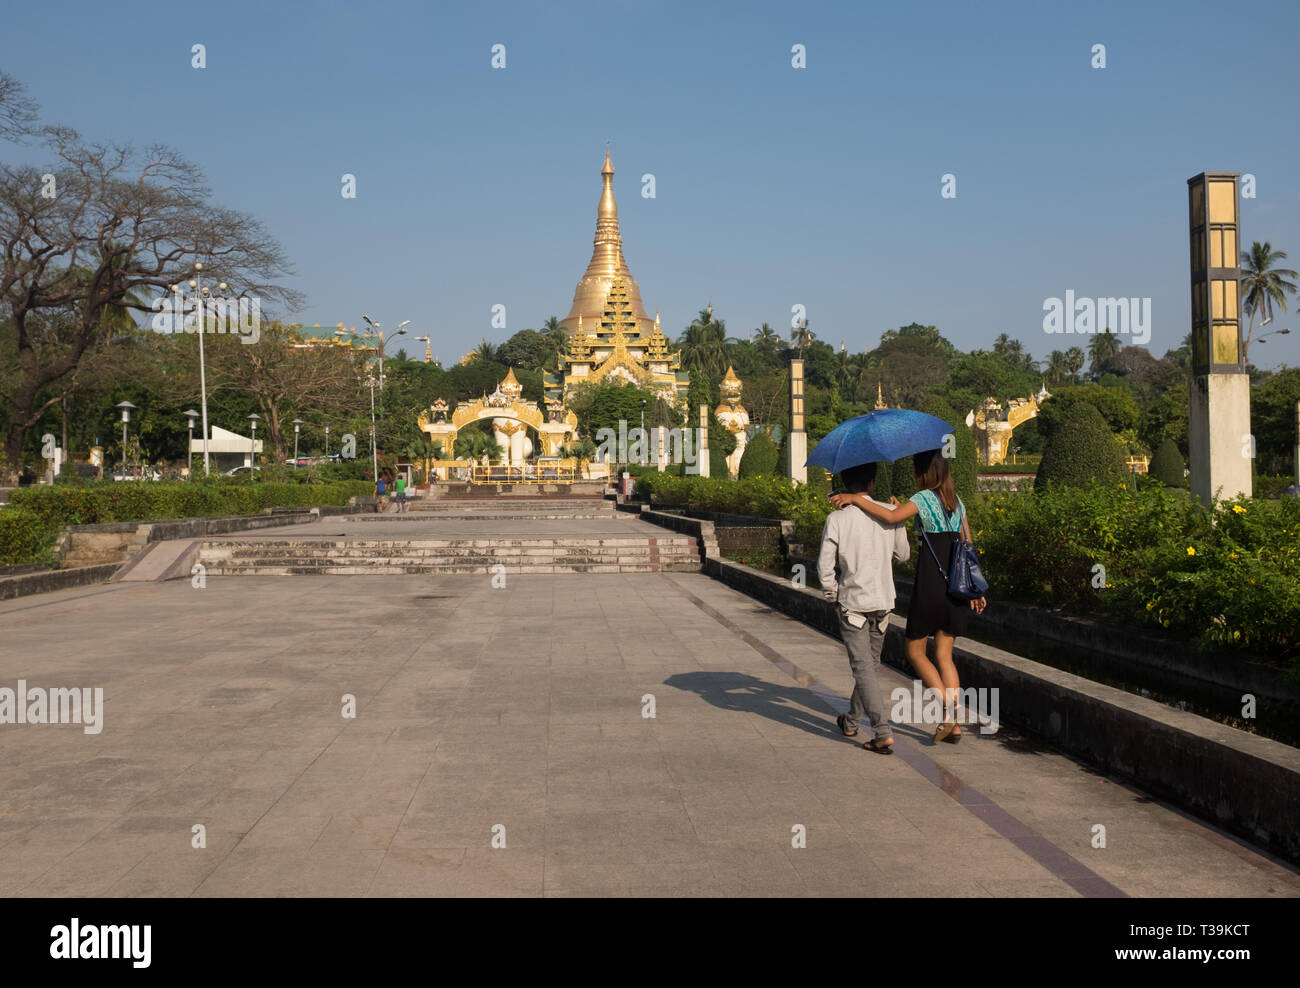 Young couple holding an umbrella walking in the People's Park & People's Square, in the background the Shwedagon Pagoda, Yangon, Myanmar (Burma) Stock Photo